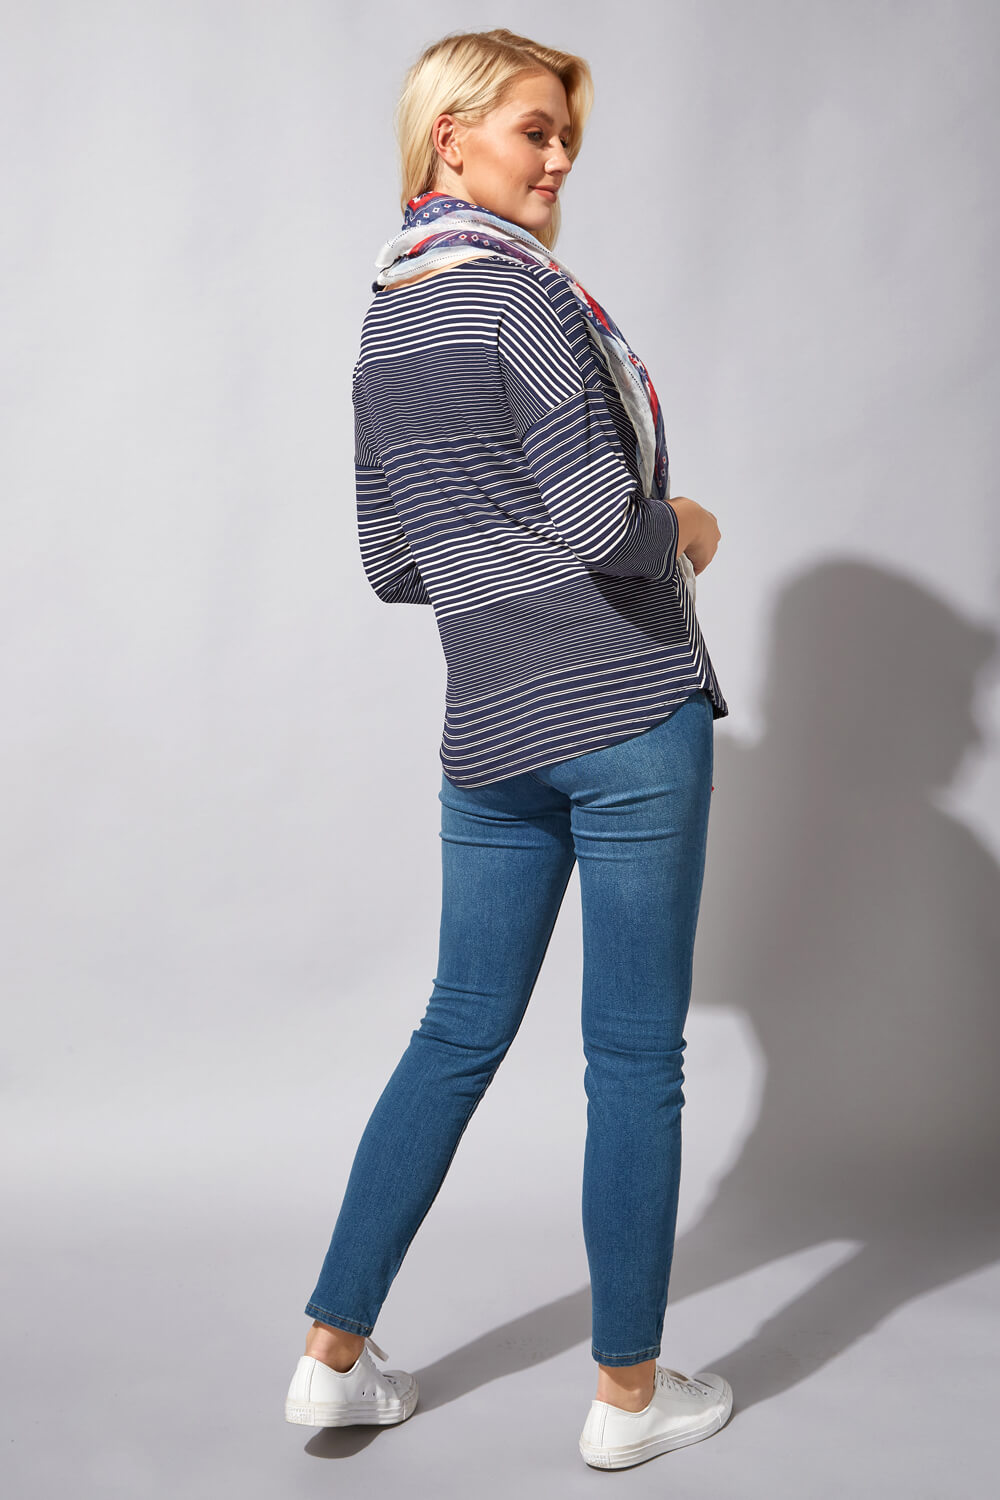 Navy  Stripe Print Top with Scarf, Image 3 of 4